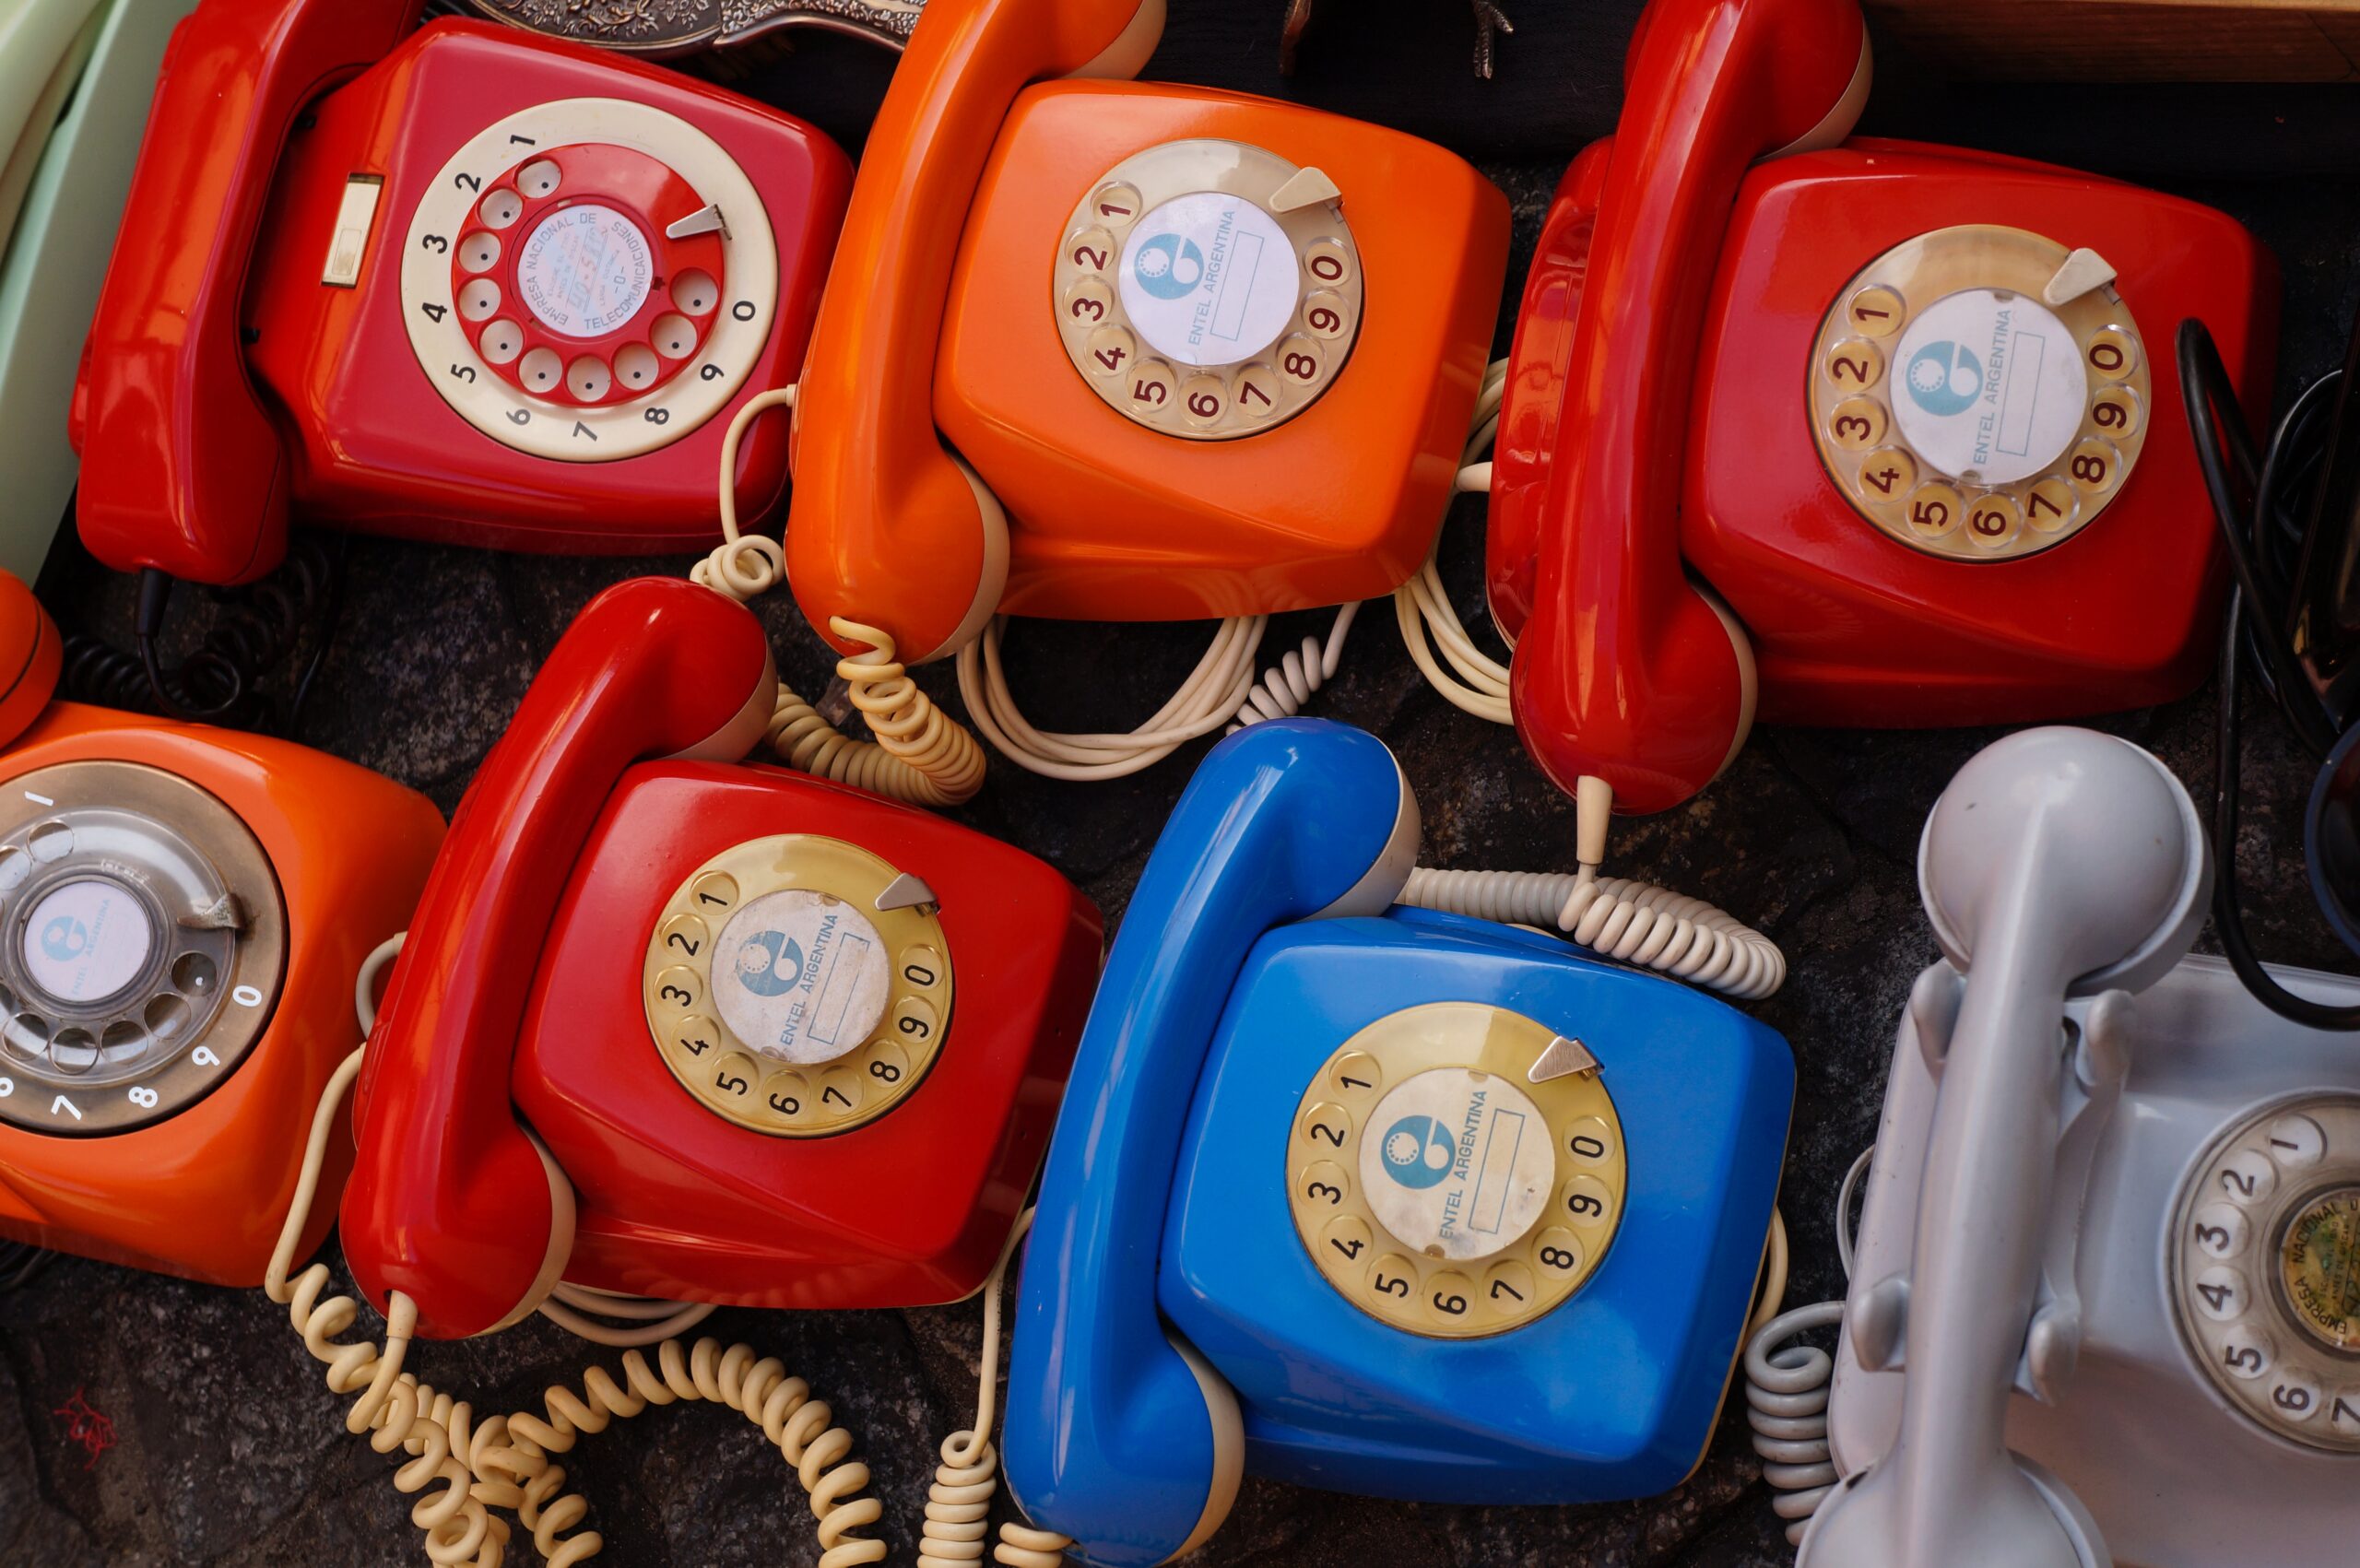 Rotary dial phones